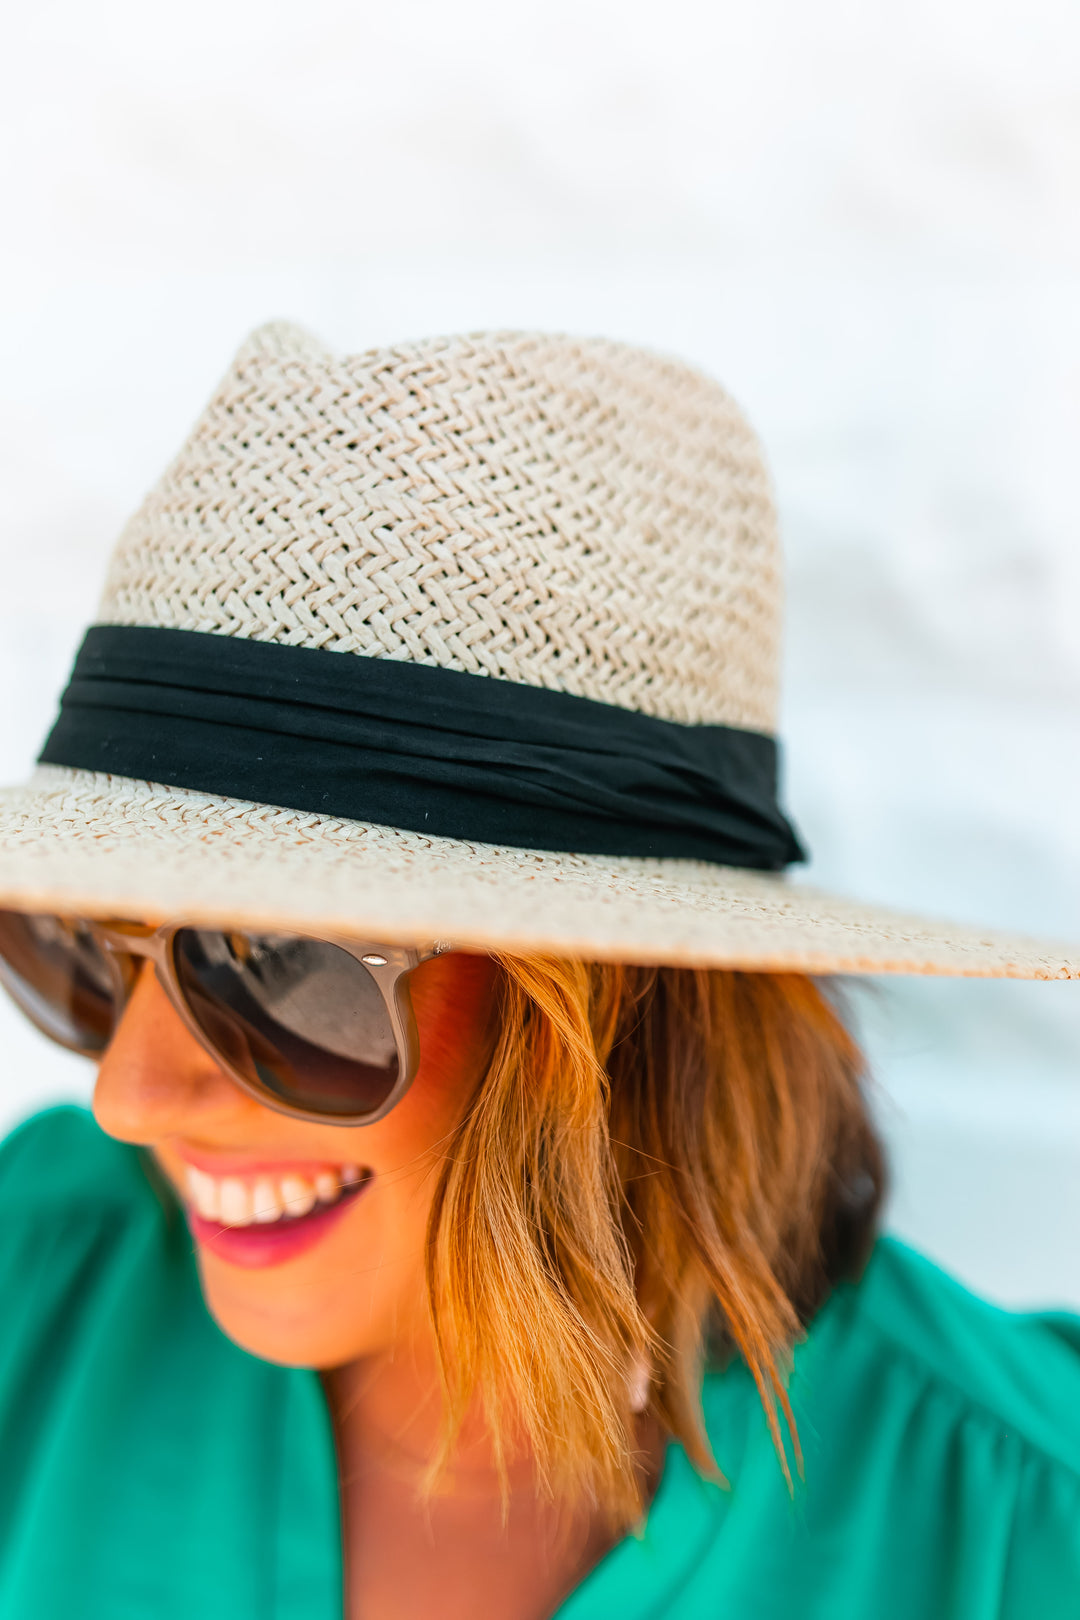 The On Vacay Black Tie Straw Hat